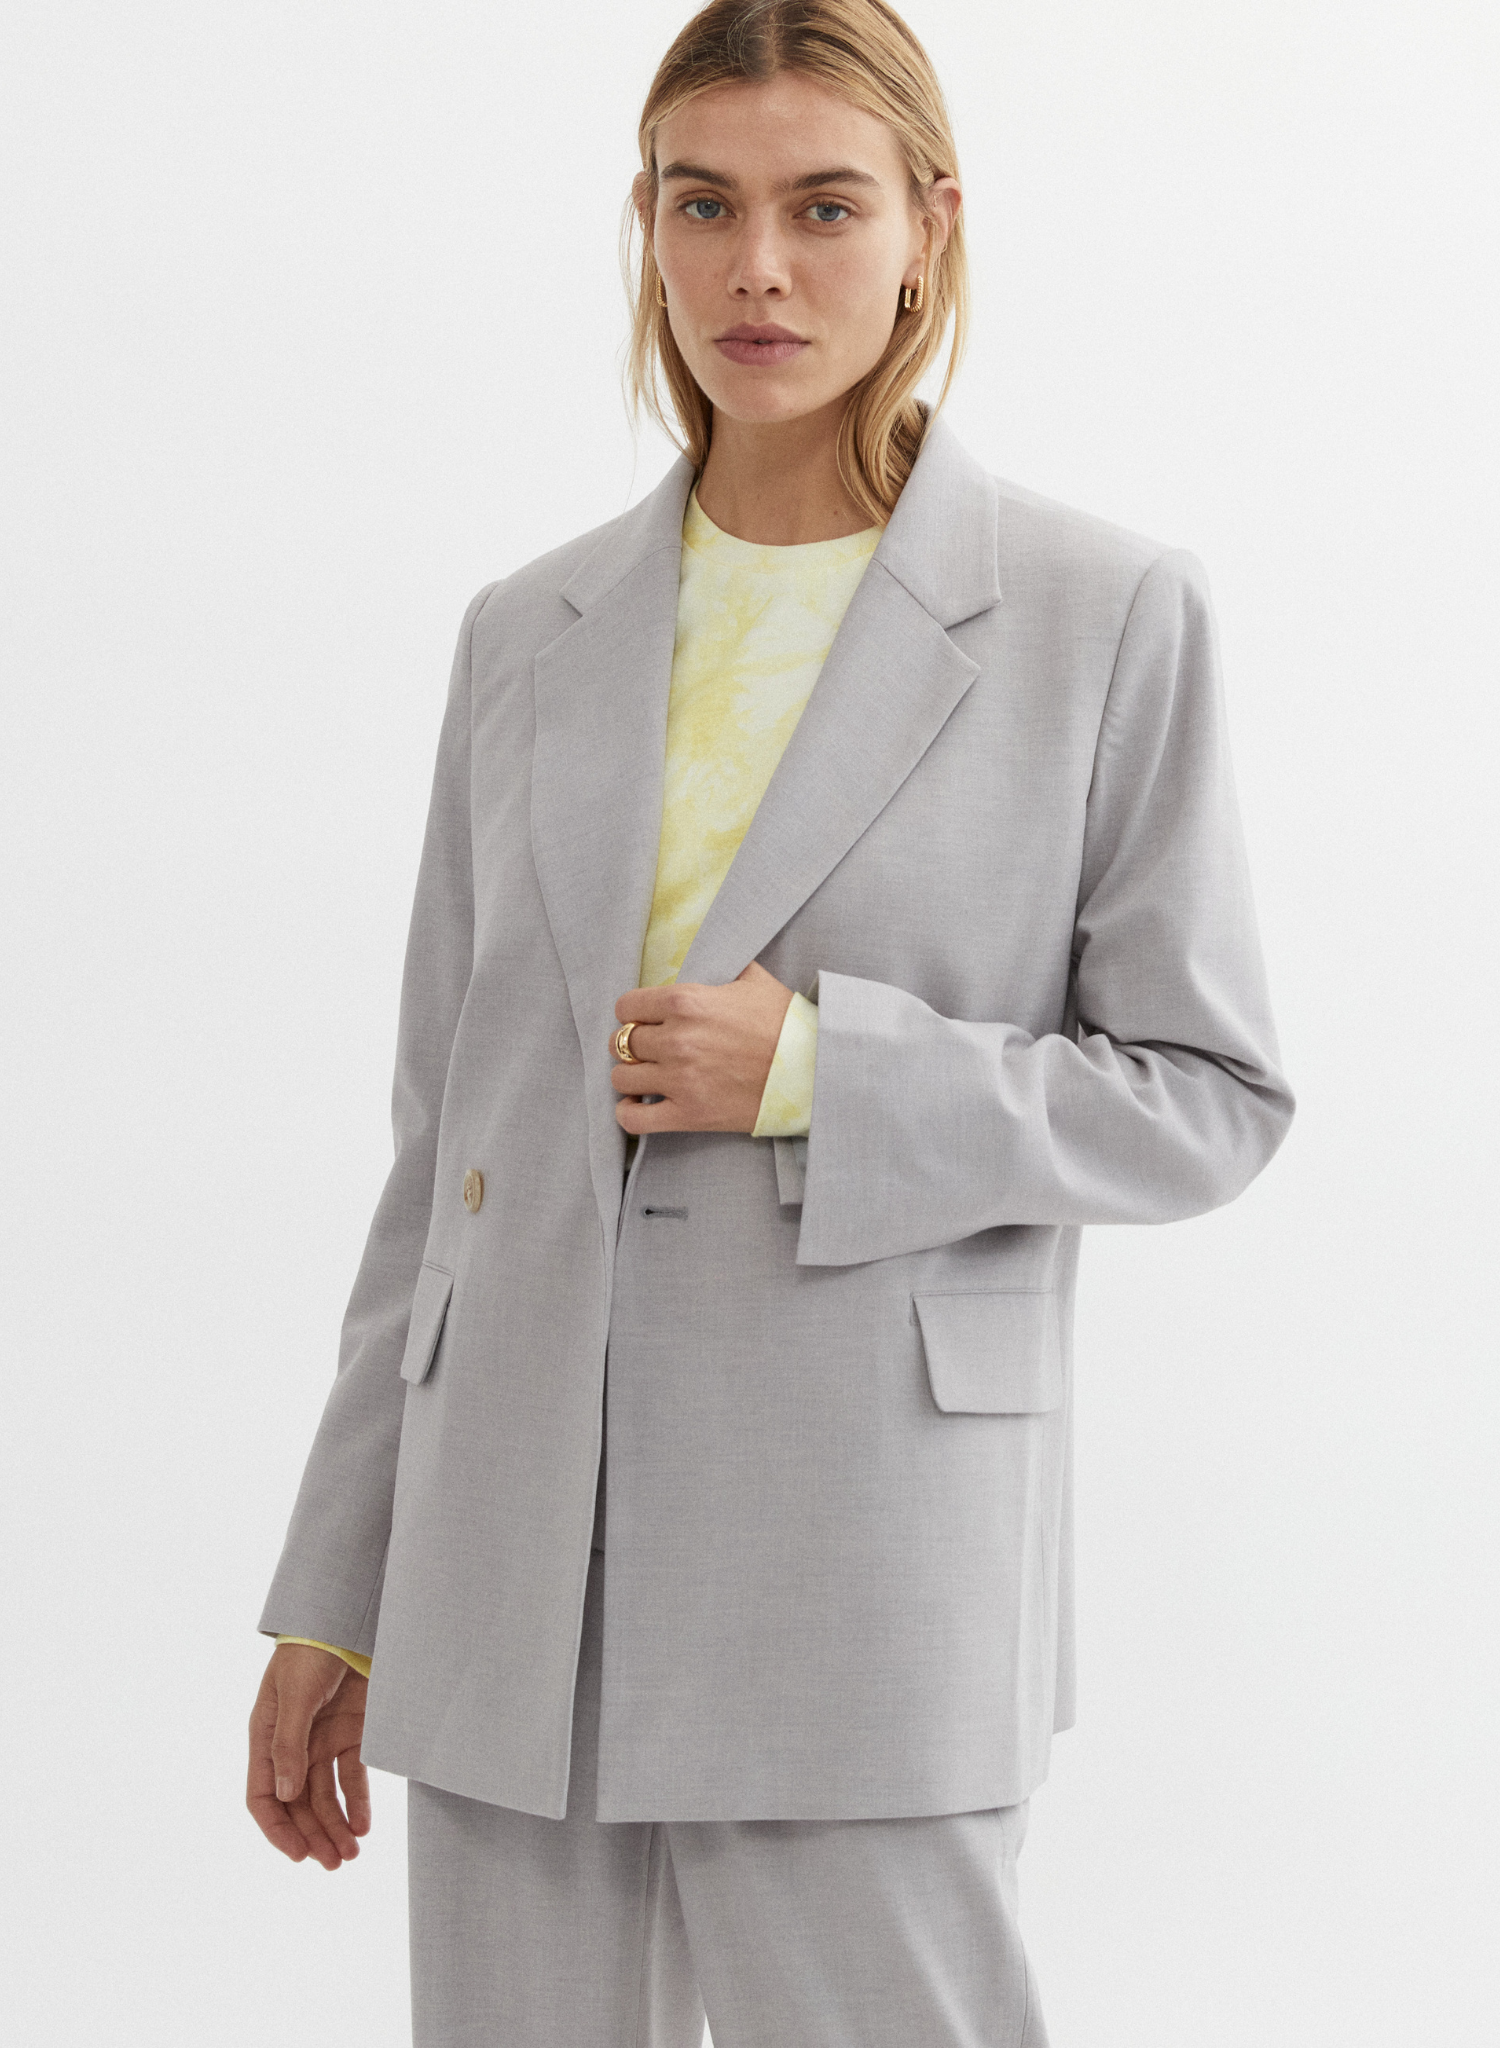 Destined for repeat wear in the minimalist wardrobe, the Lawrence Blazer offers an all-season, all-occasion aesthetic. Exaggerated shoulders, relaxed sleeves and an oversized fit add coveted comfort and effortless style. 